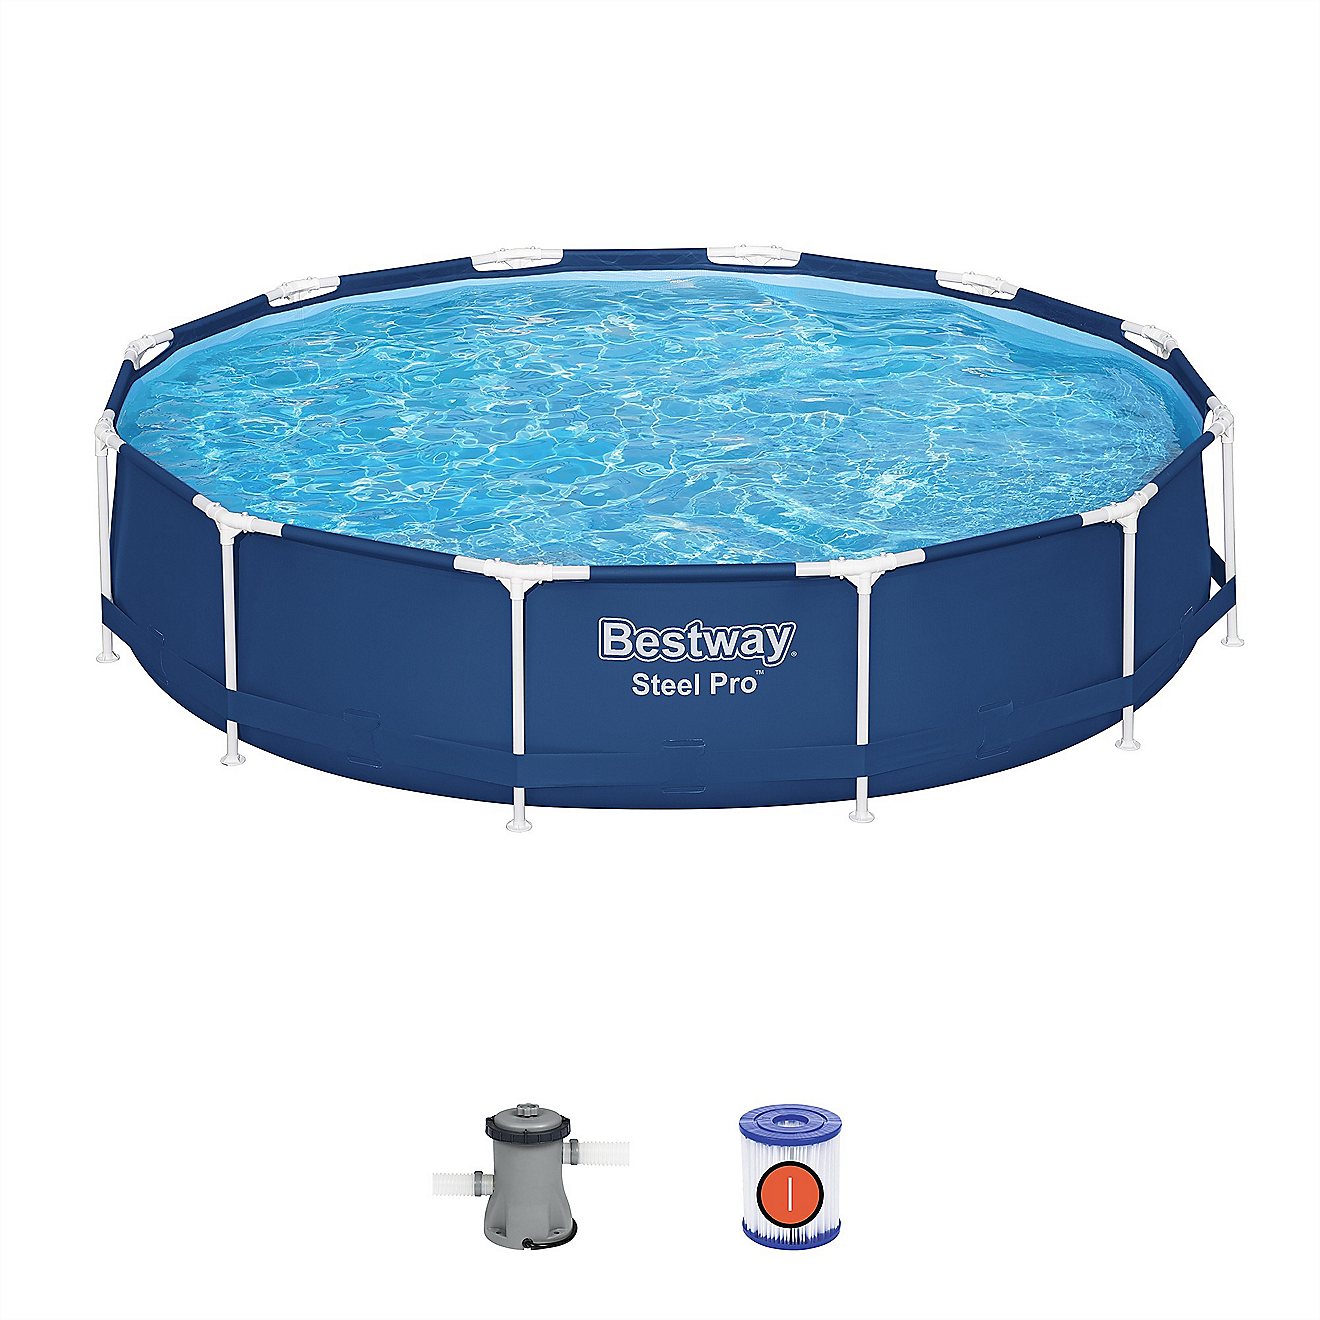 Bestway Steel Pro 12 ft x 30 in Above Ground Pool Set                                                                            - view number 3